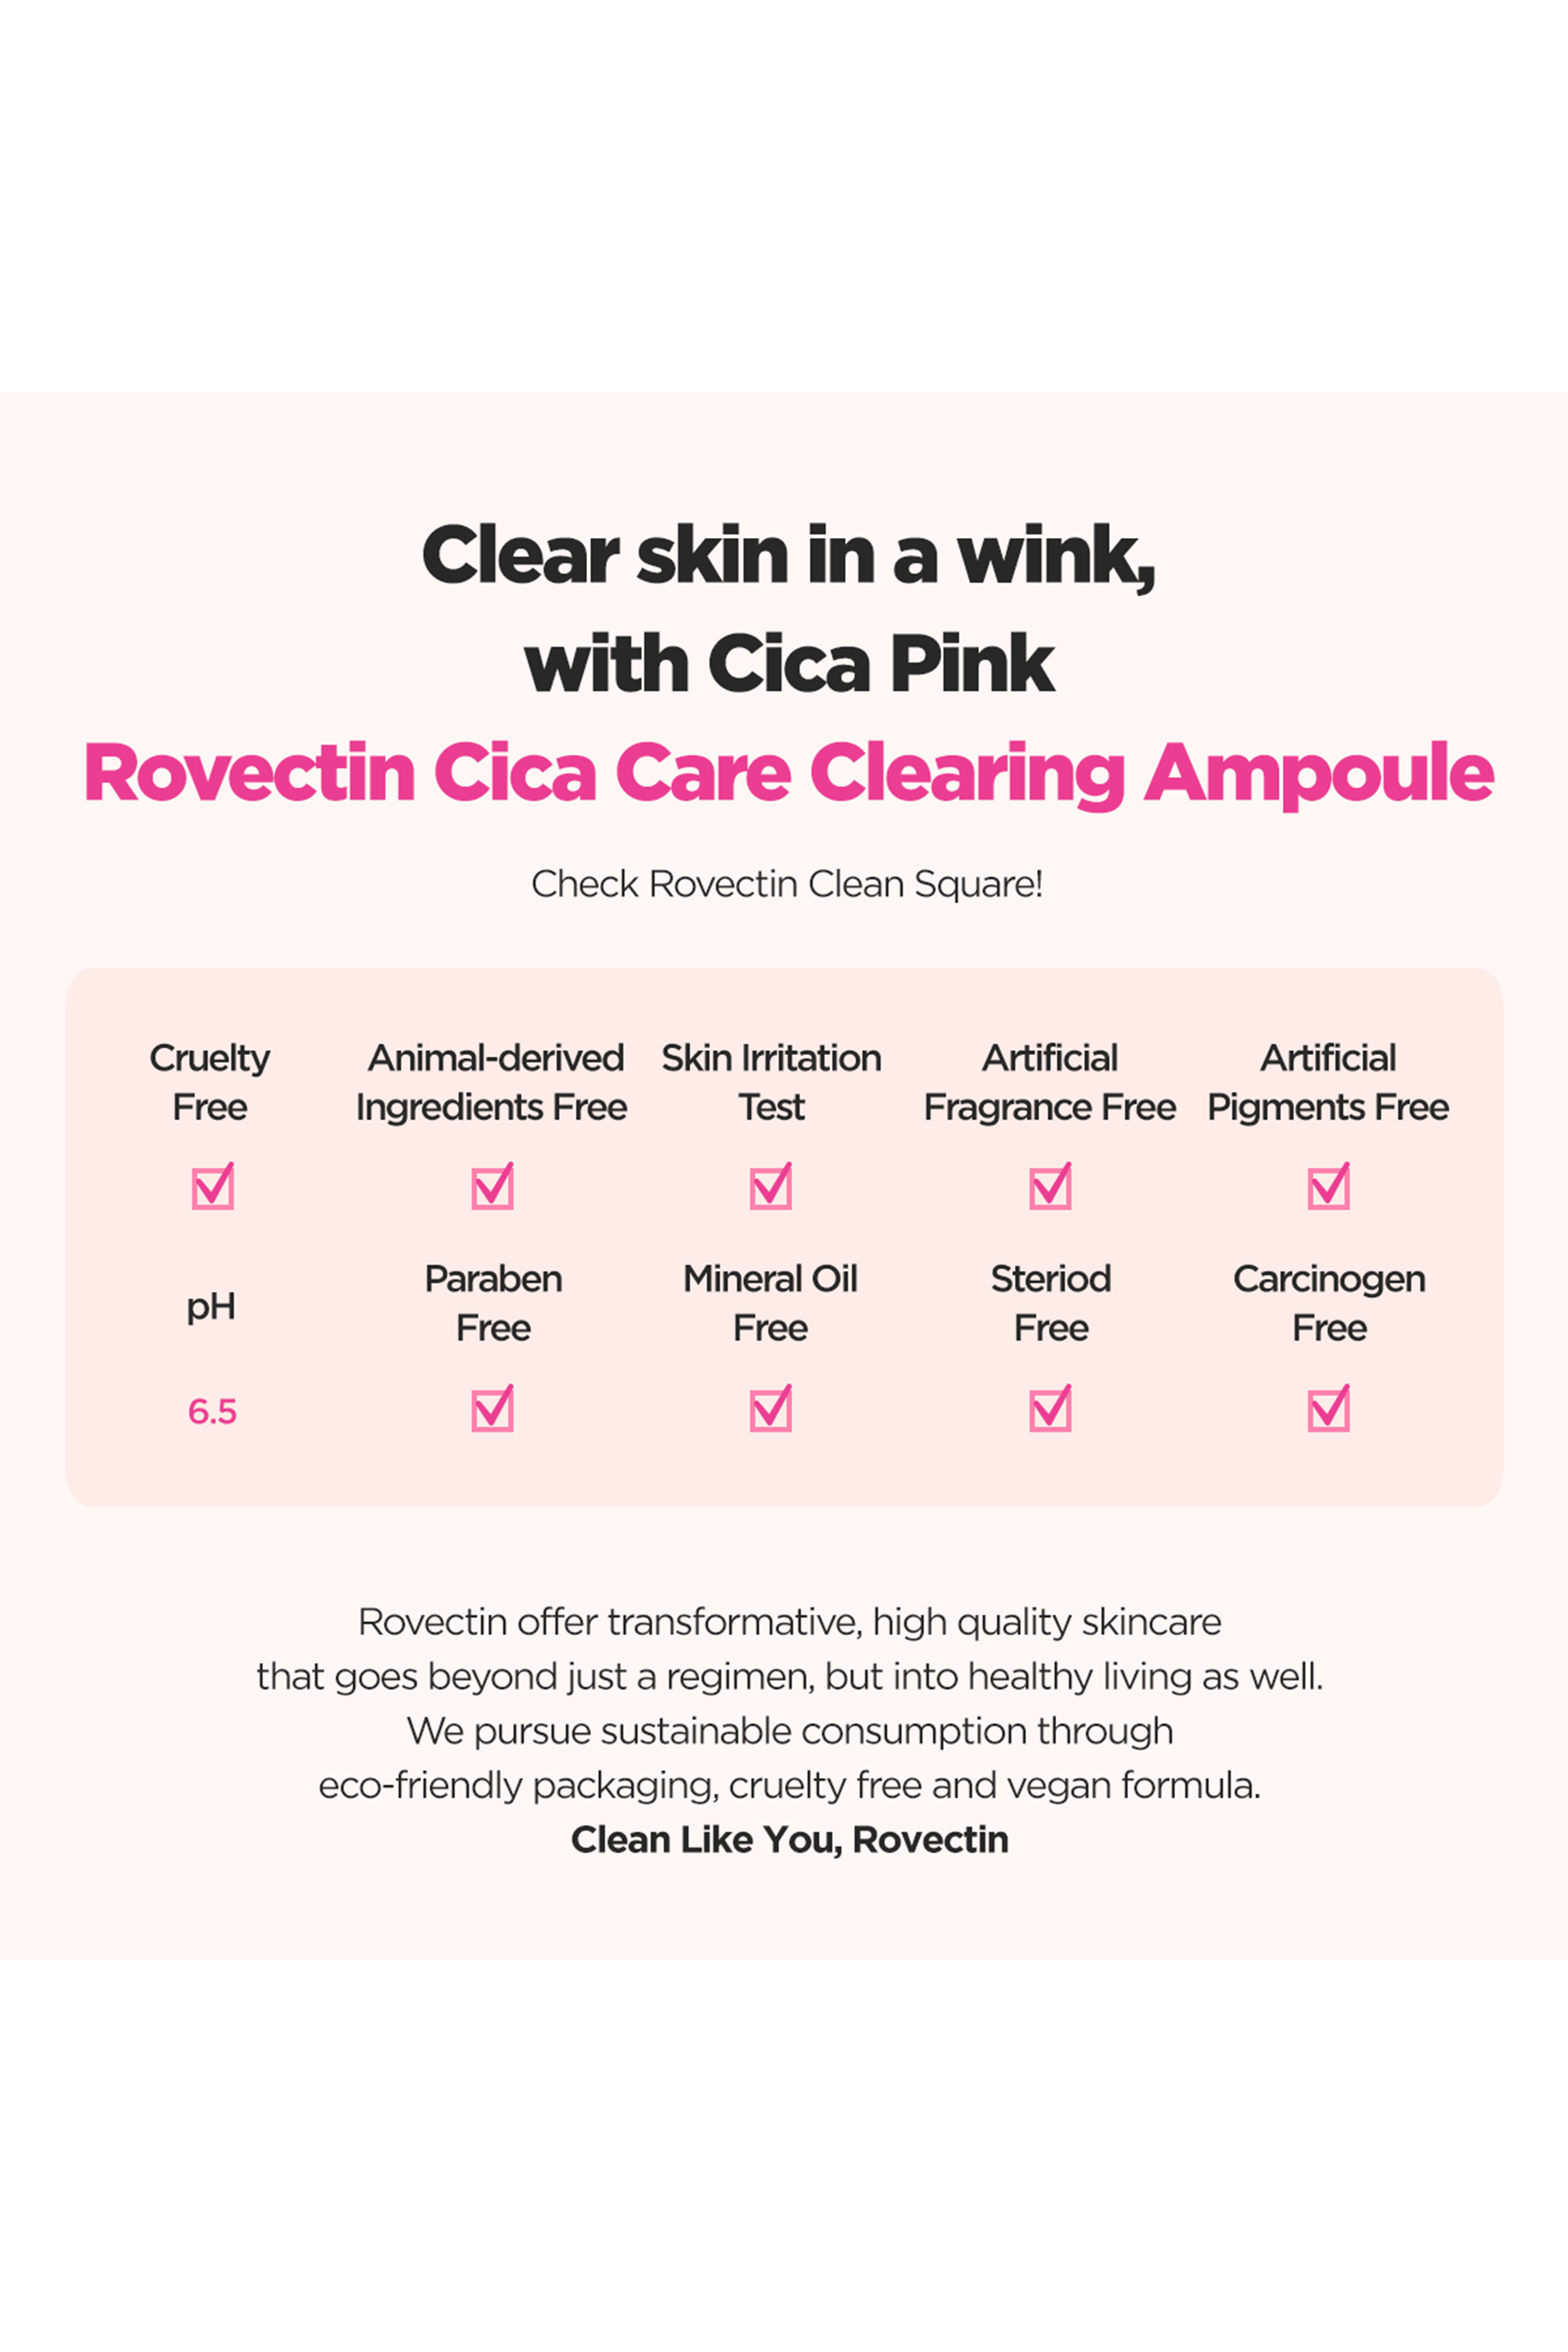 Cica Care Clearing Ampoule - Rovectin Skin Essentials